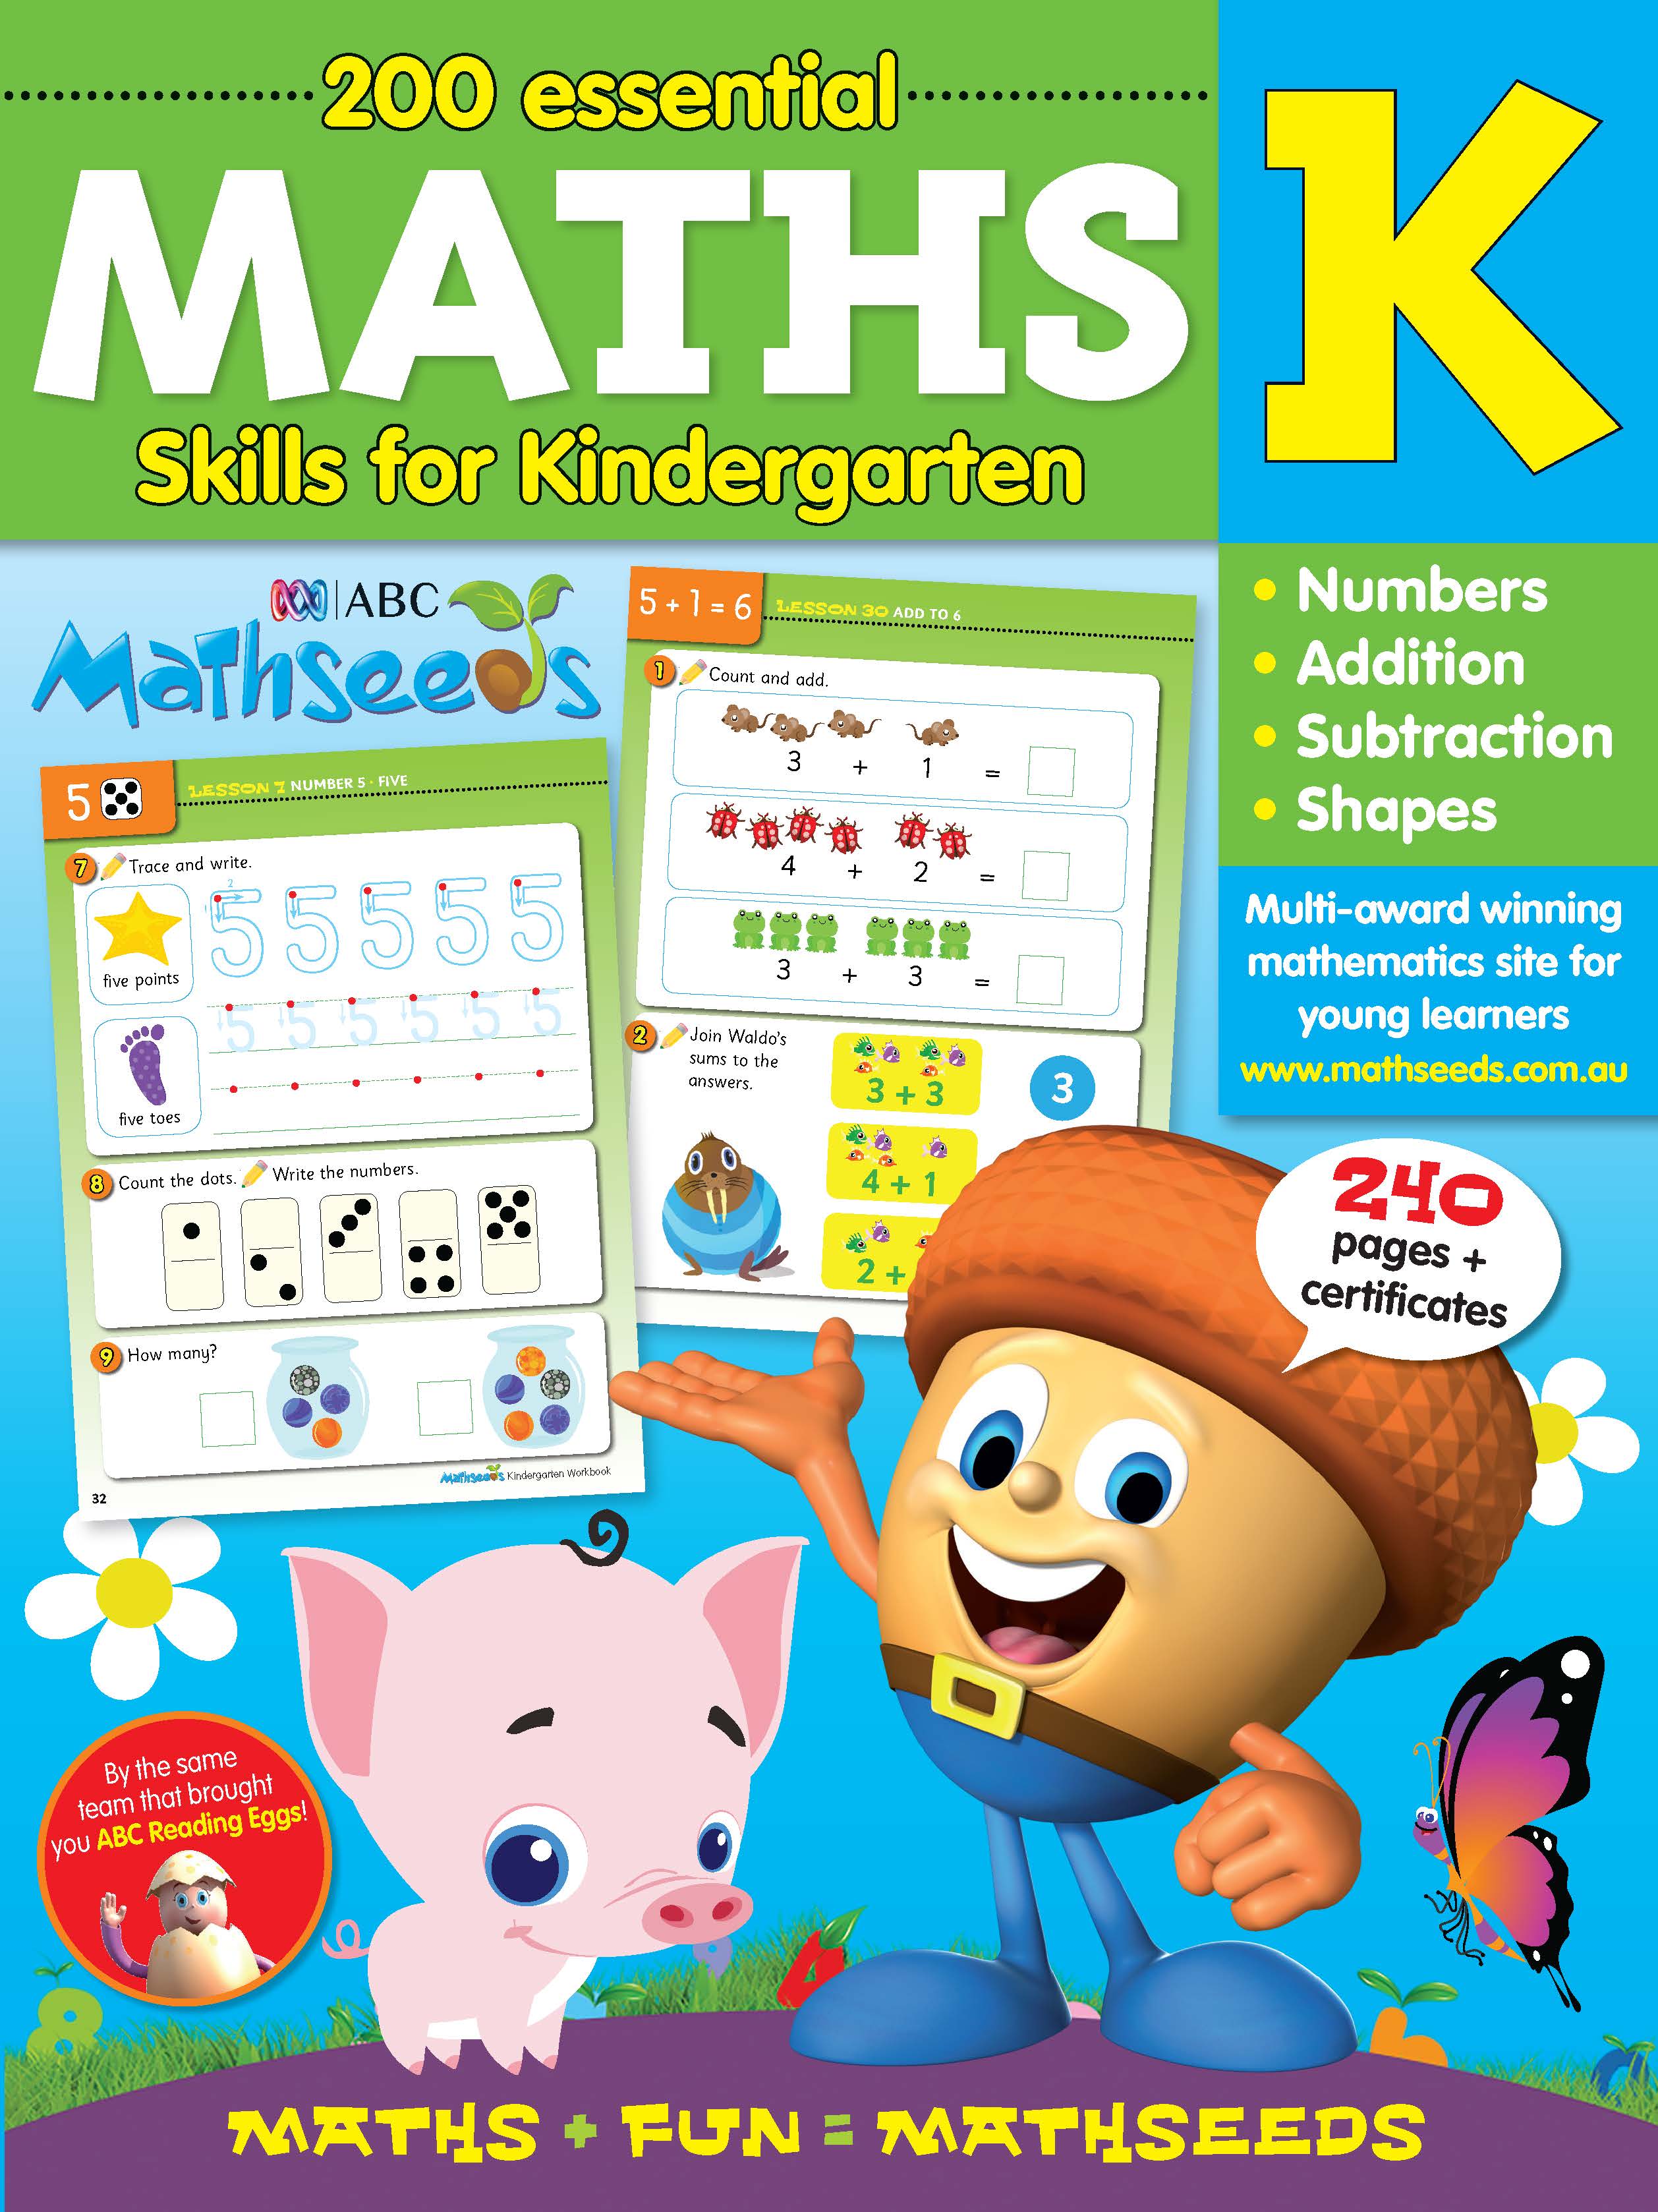 Picture of ABC Mathseeds Maths Skills for Kindergarten